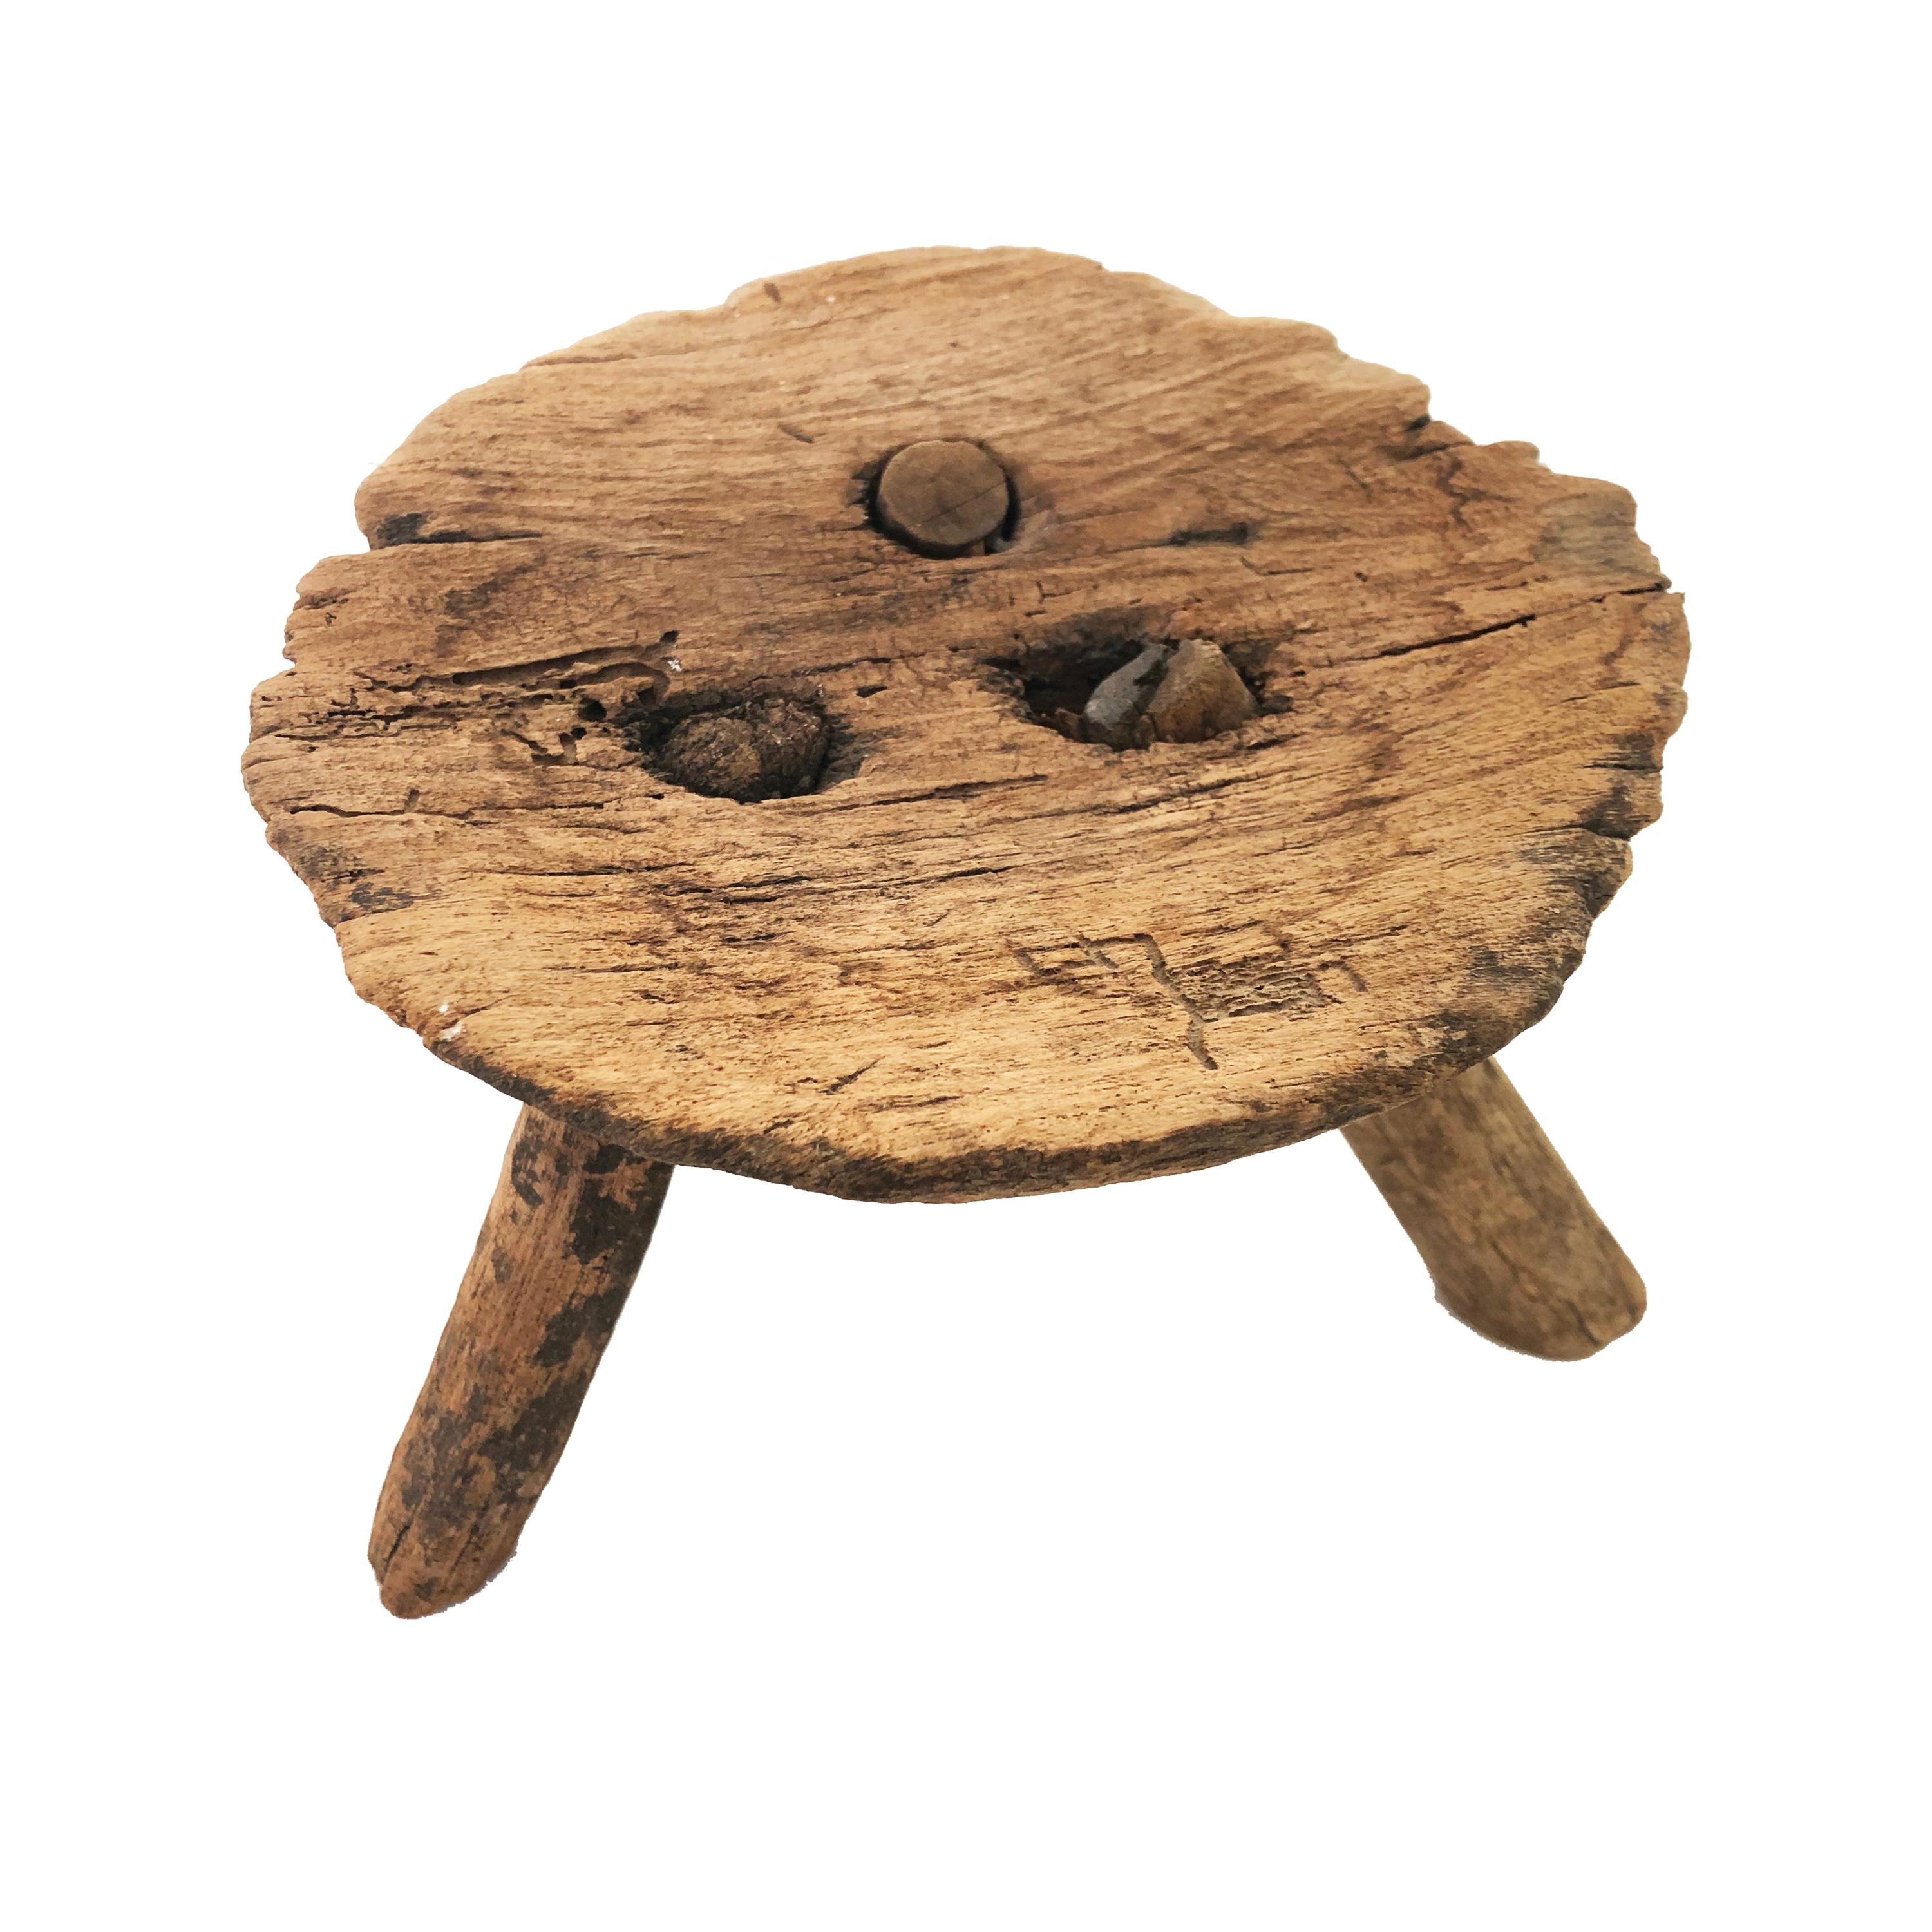 Late 19th Century Mezquite Min Milking Wood Stool with Thick Round Top